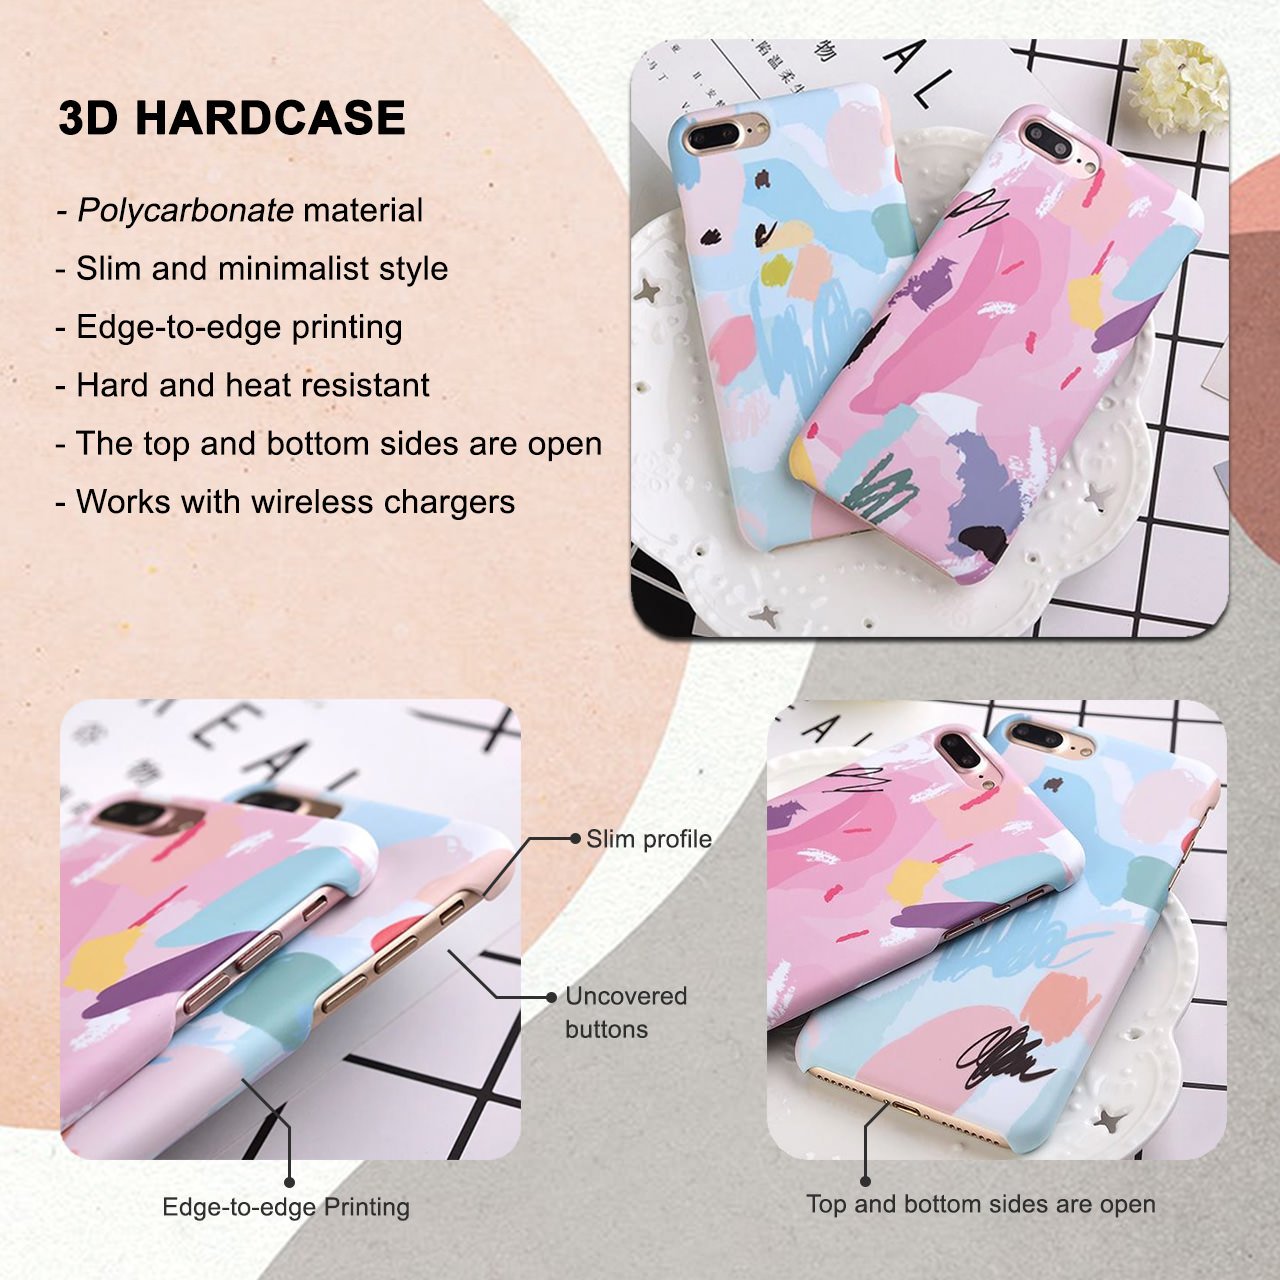 Abstract Multicolor Cubism Painting iPhone 6 / 6s Plus Case